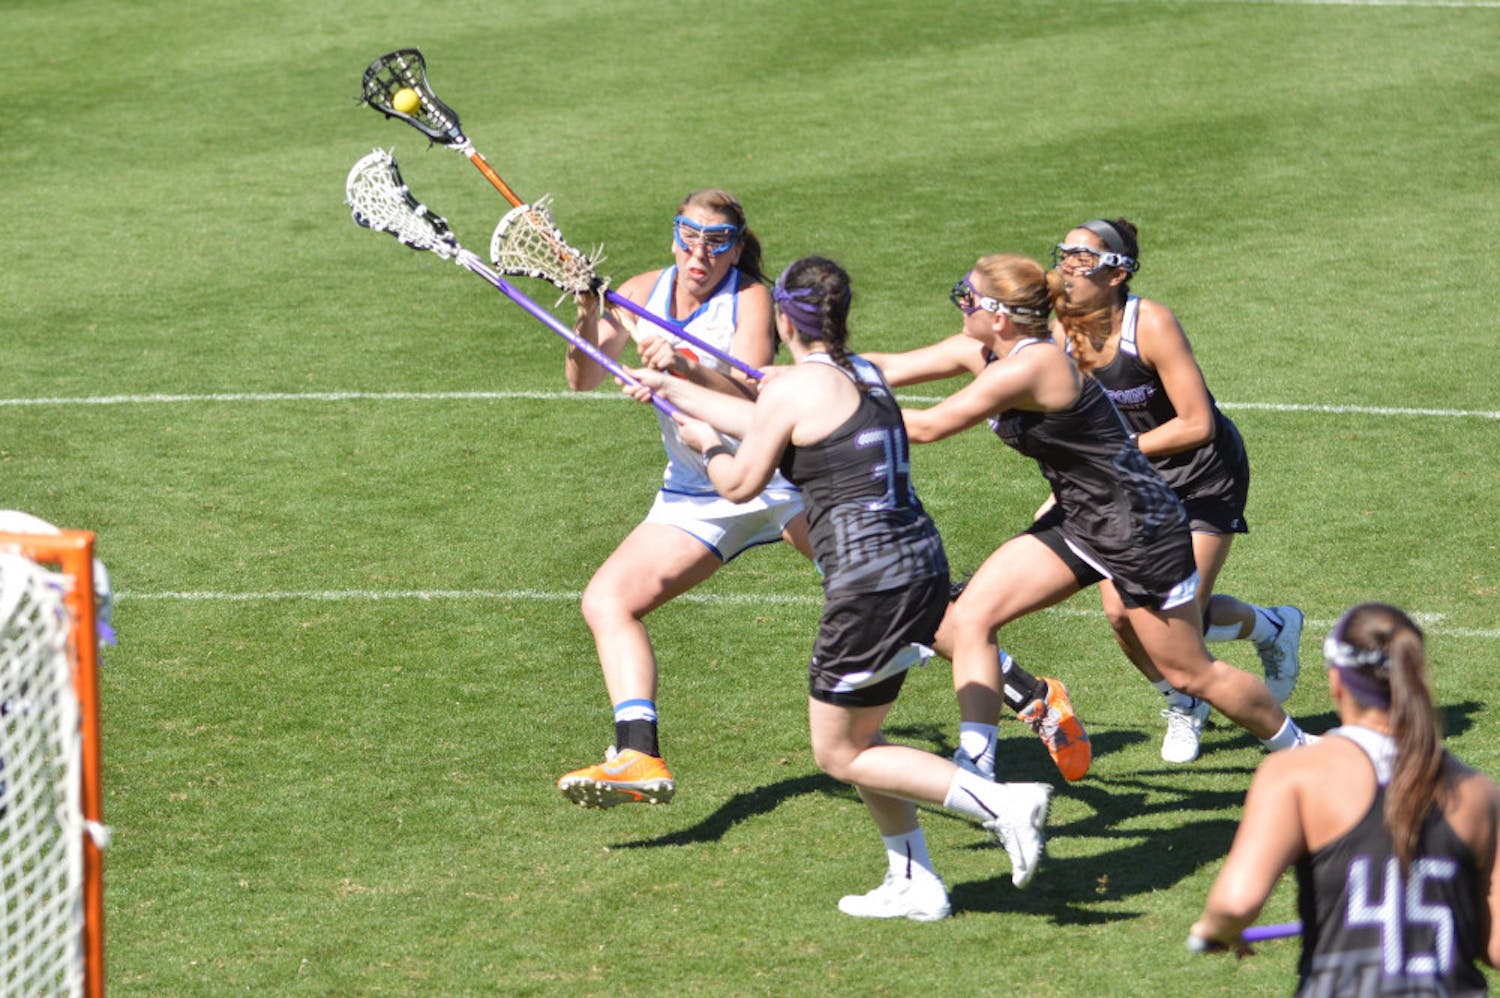 Shannon Gilroy attempts a shot during Florida's 18-7 win against High Point on Saturday in Donald R. Dizney Stadium. The junior midfielder set UF single-game records for draw controls (10), goals (8) and shots (13) against the Panthers.